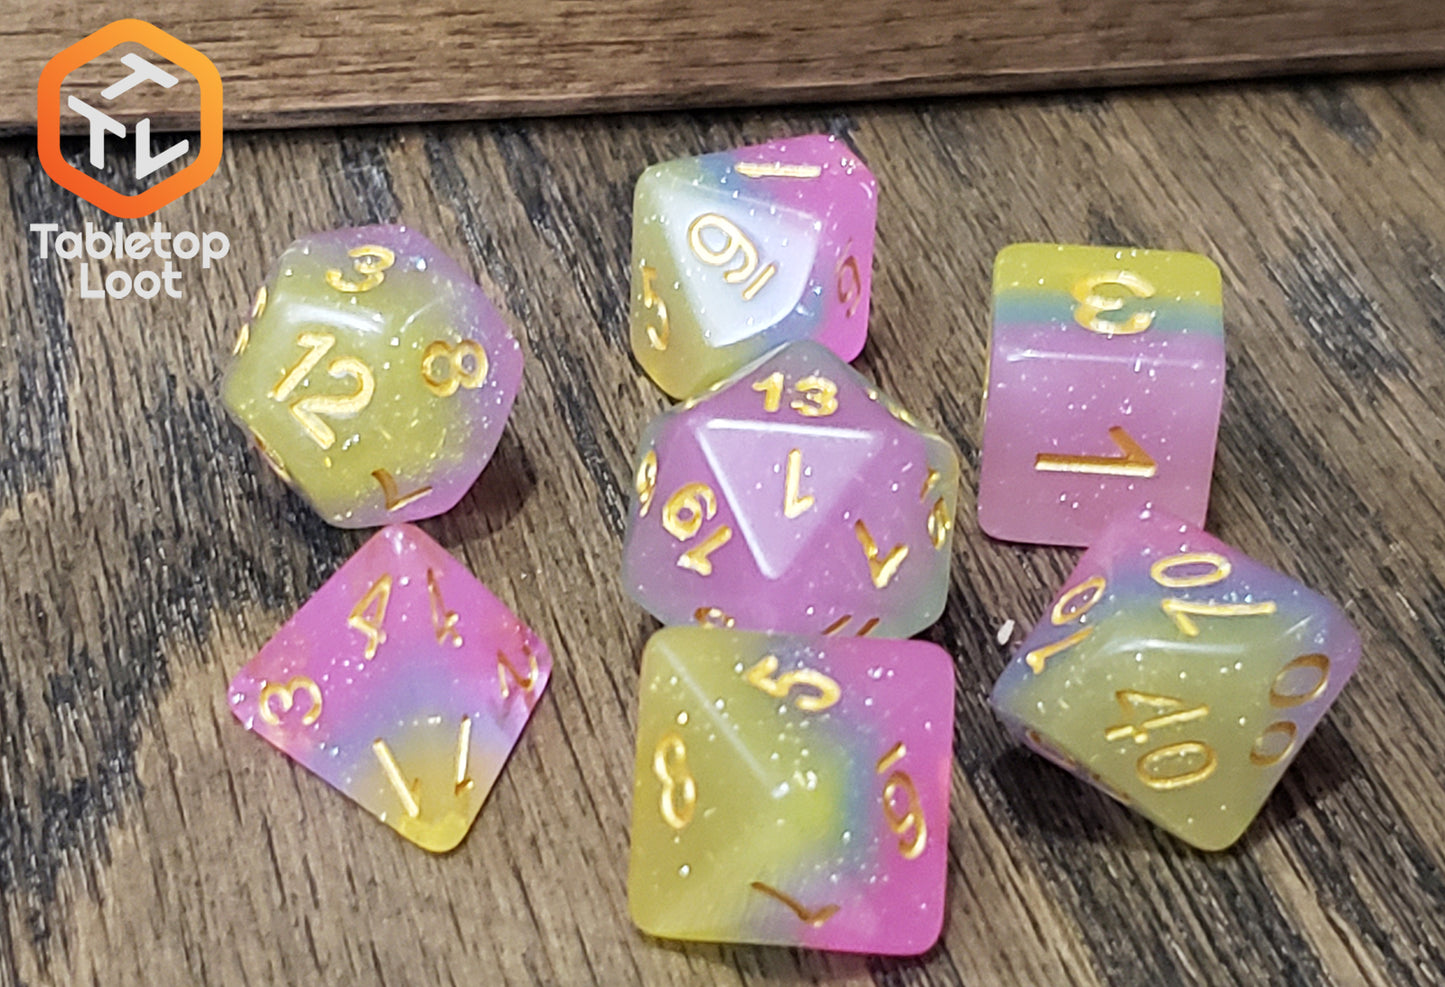 The Candyland 7 piece dice set from Tabletop Loot with layers of yellow, blue, and pink glittery resin and gold numbering.